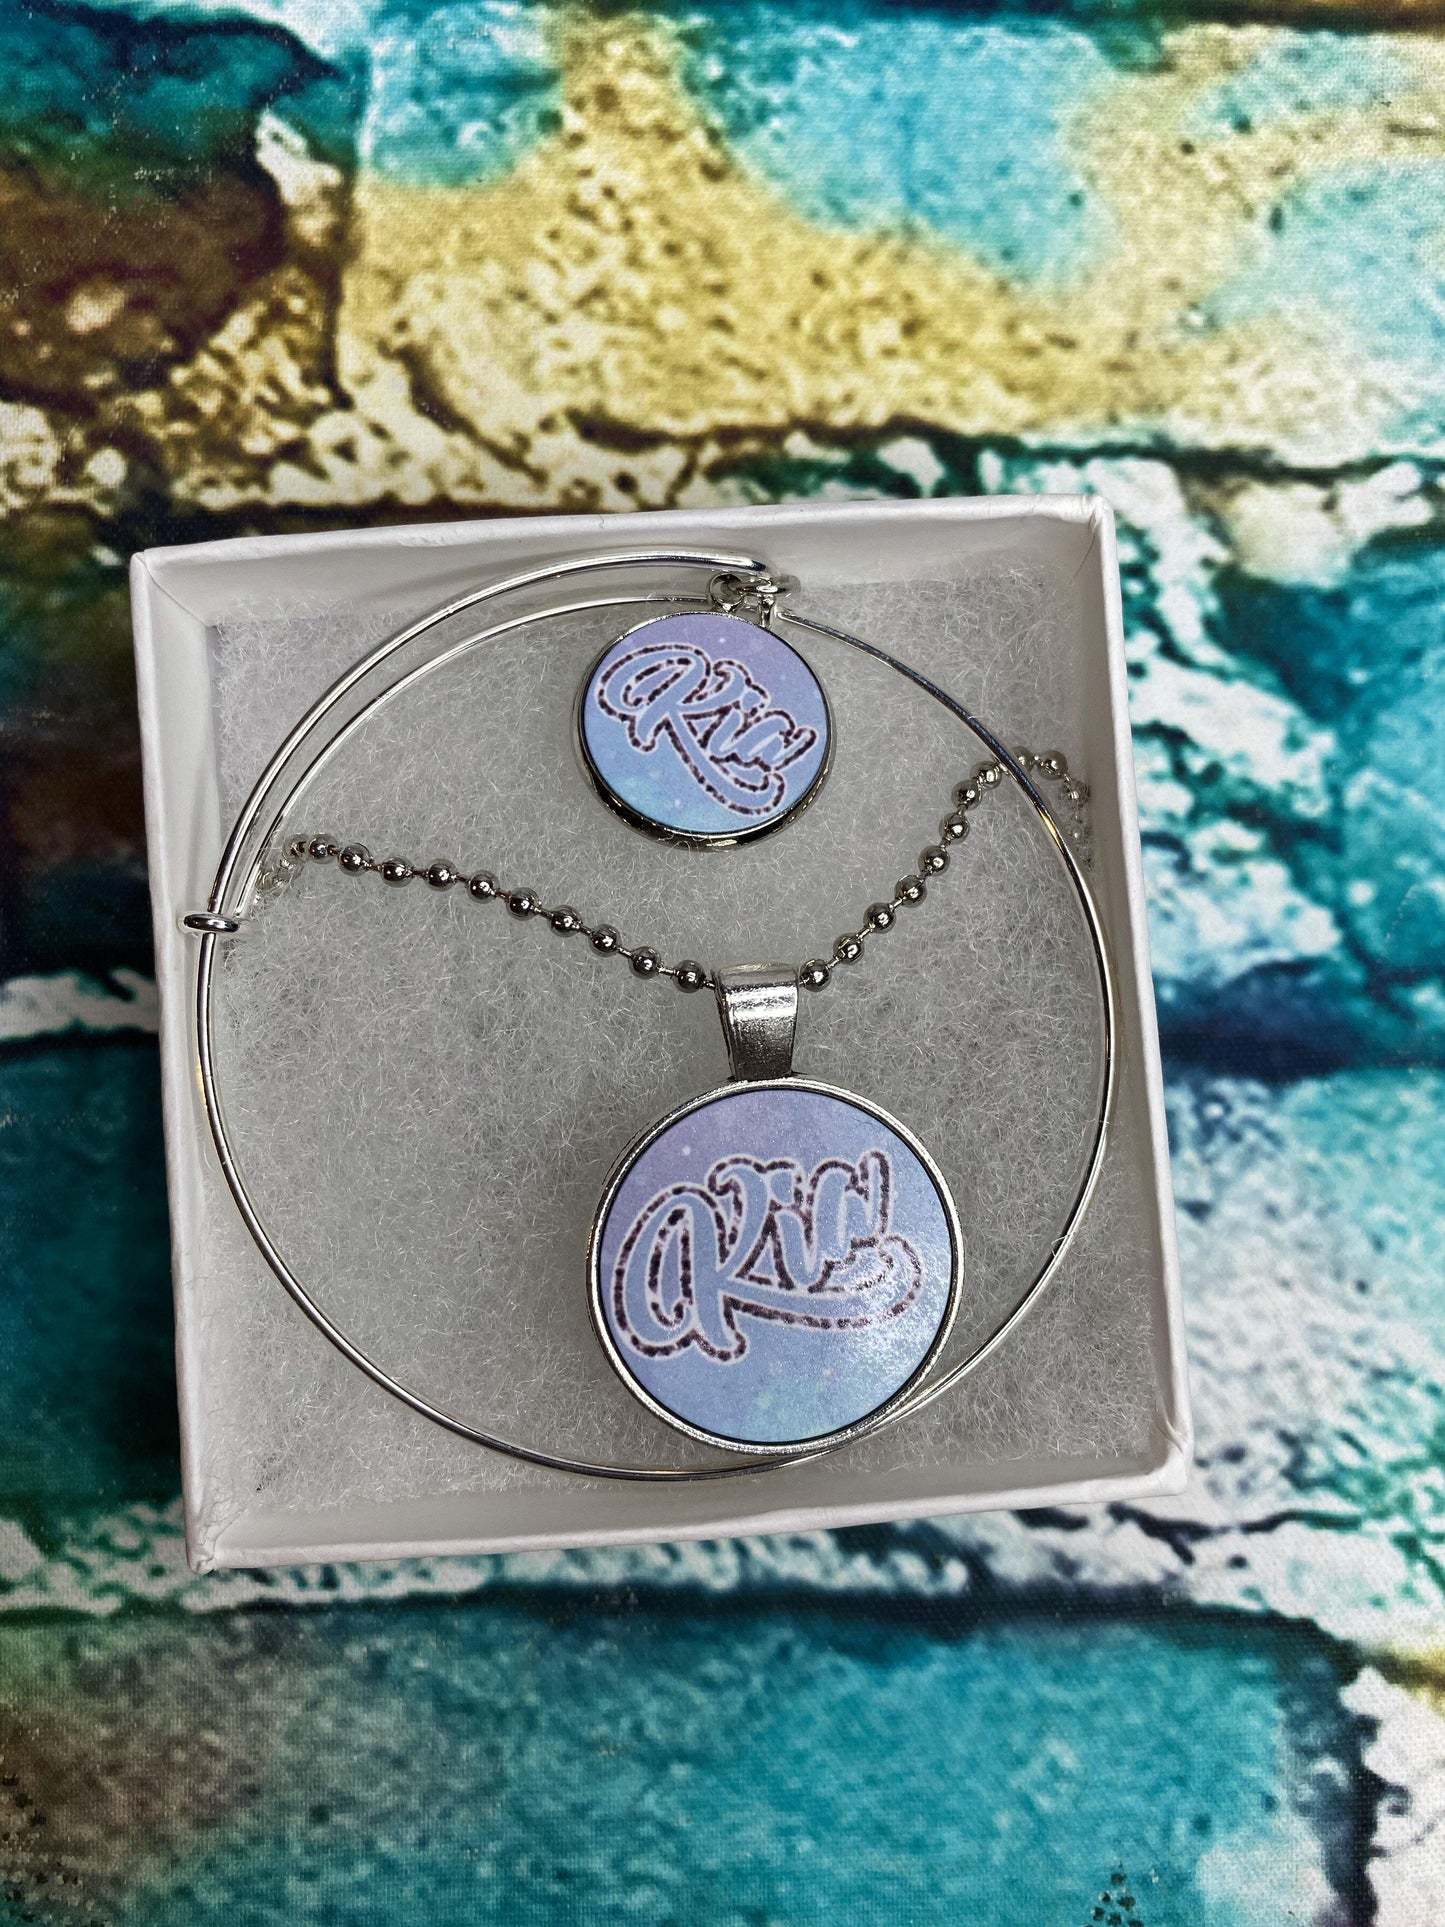 Photo Pendant Necklace - Family First Designs LLC